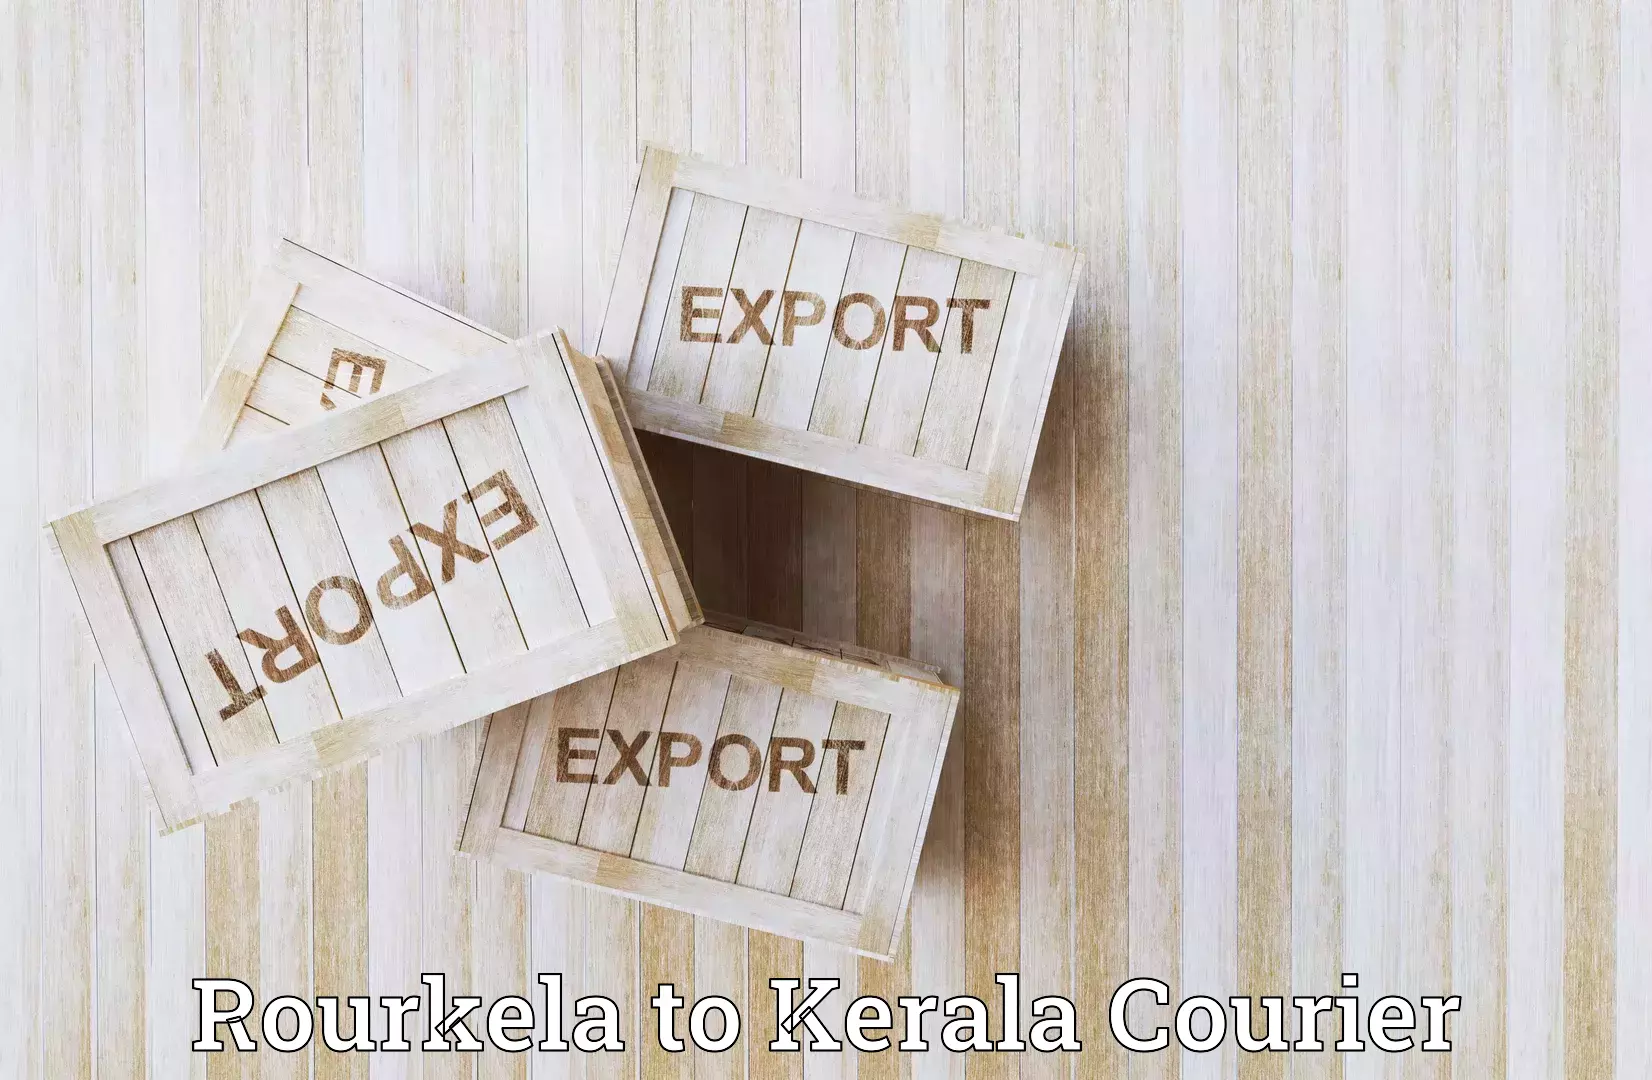 Reliable shipping partners in Rourkela to Kalpetta